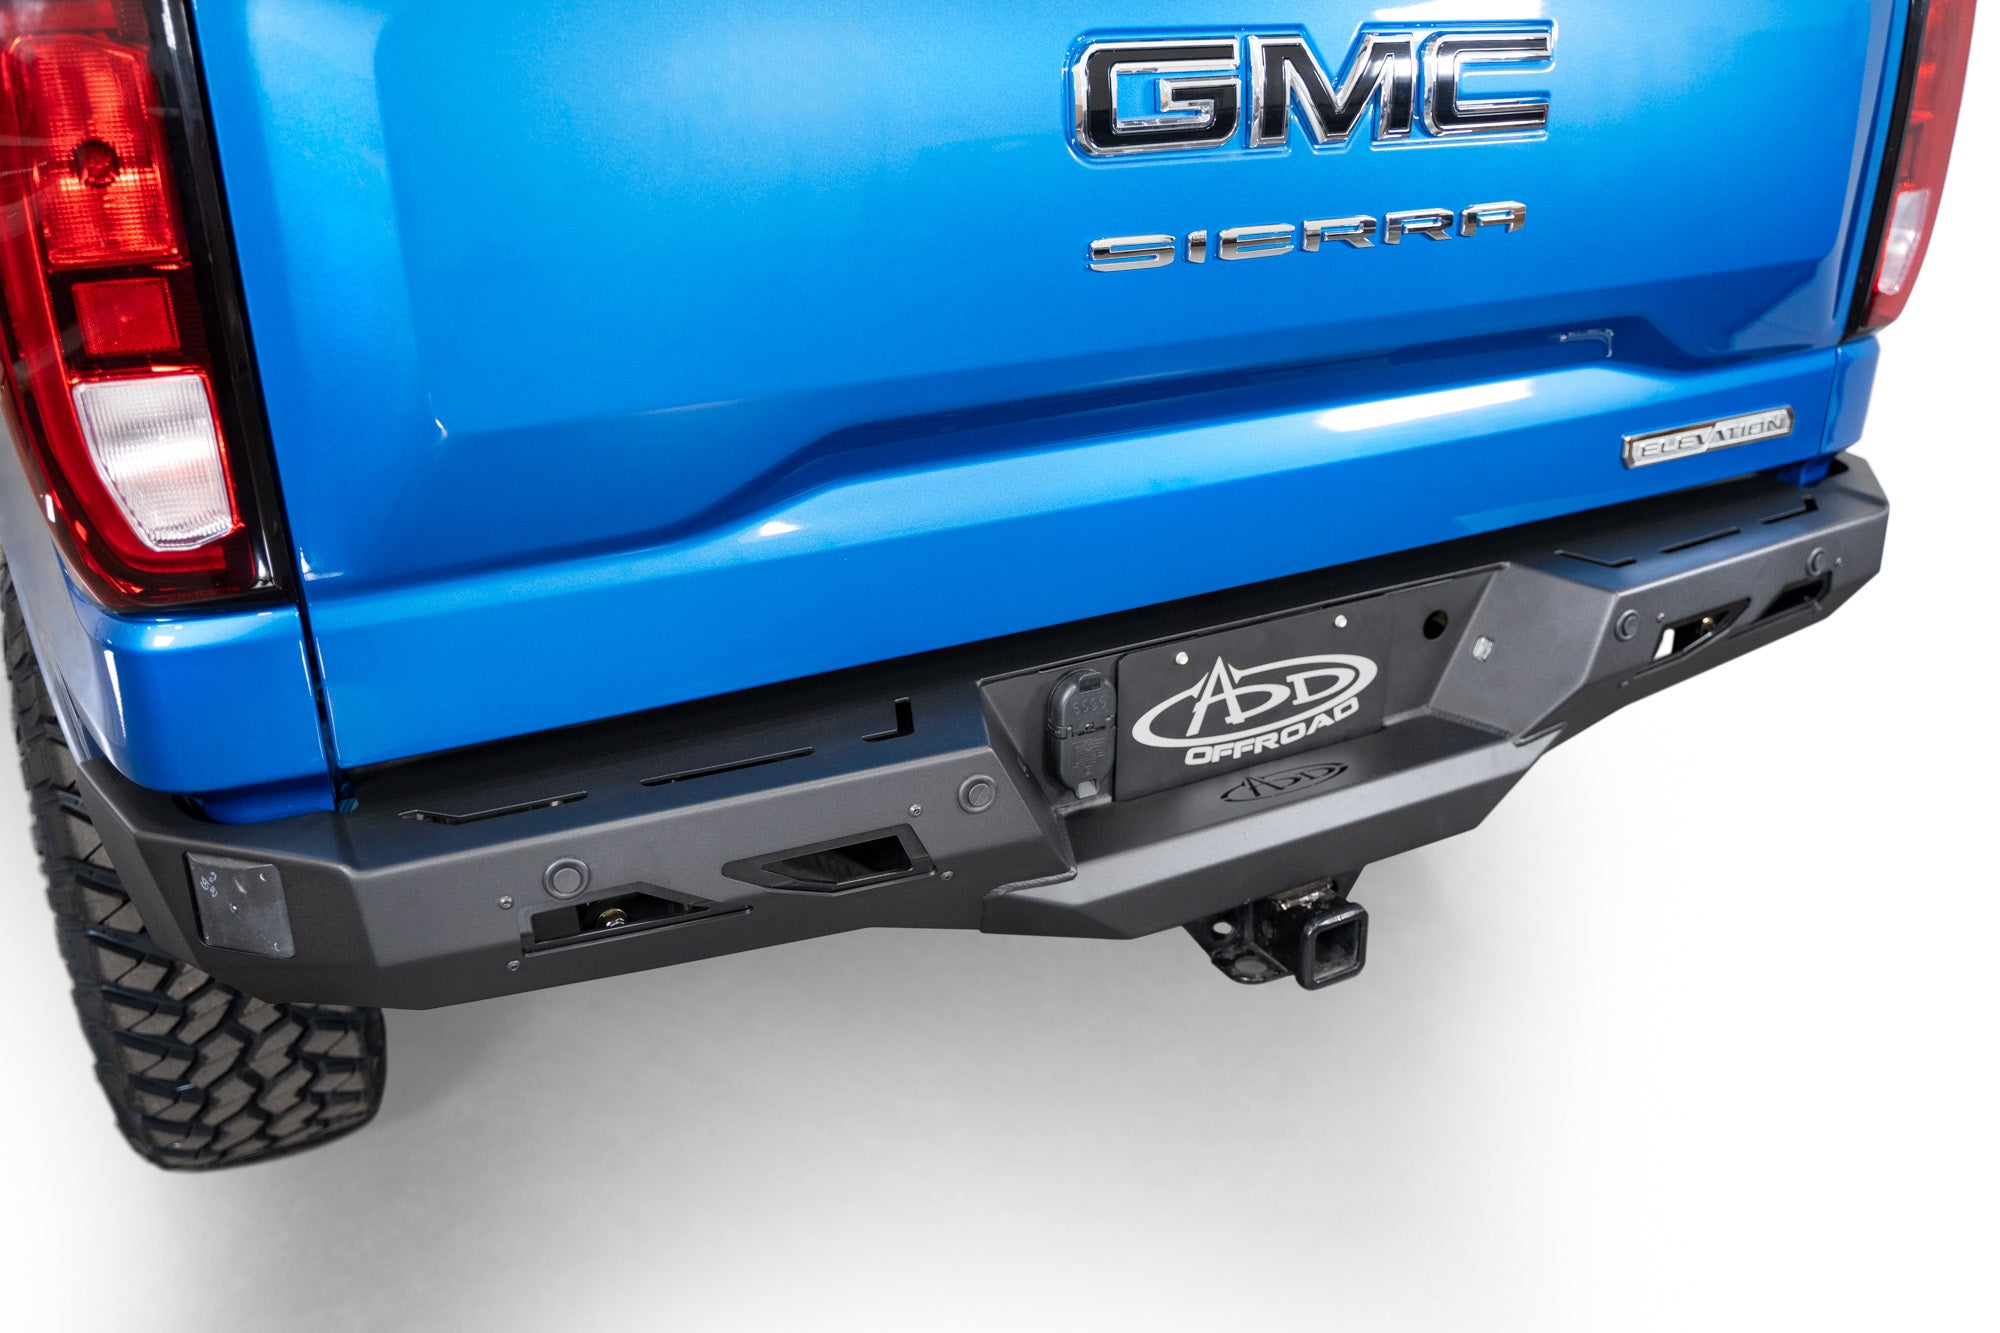 Trailer plugs and tow hitch retained Black Label Rear Bumper for the 2022-2024 Chevy/GMC 1500